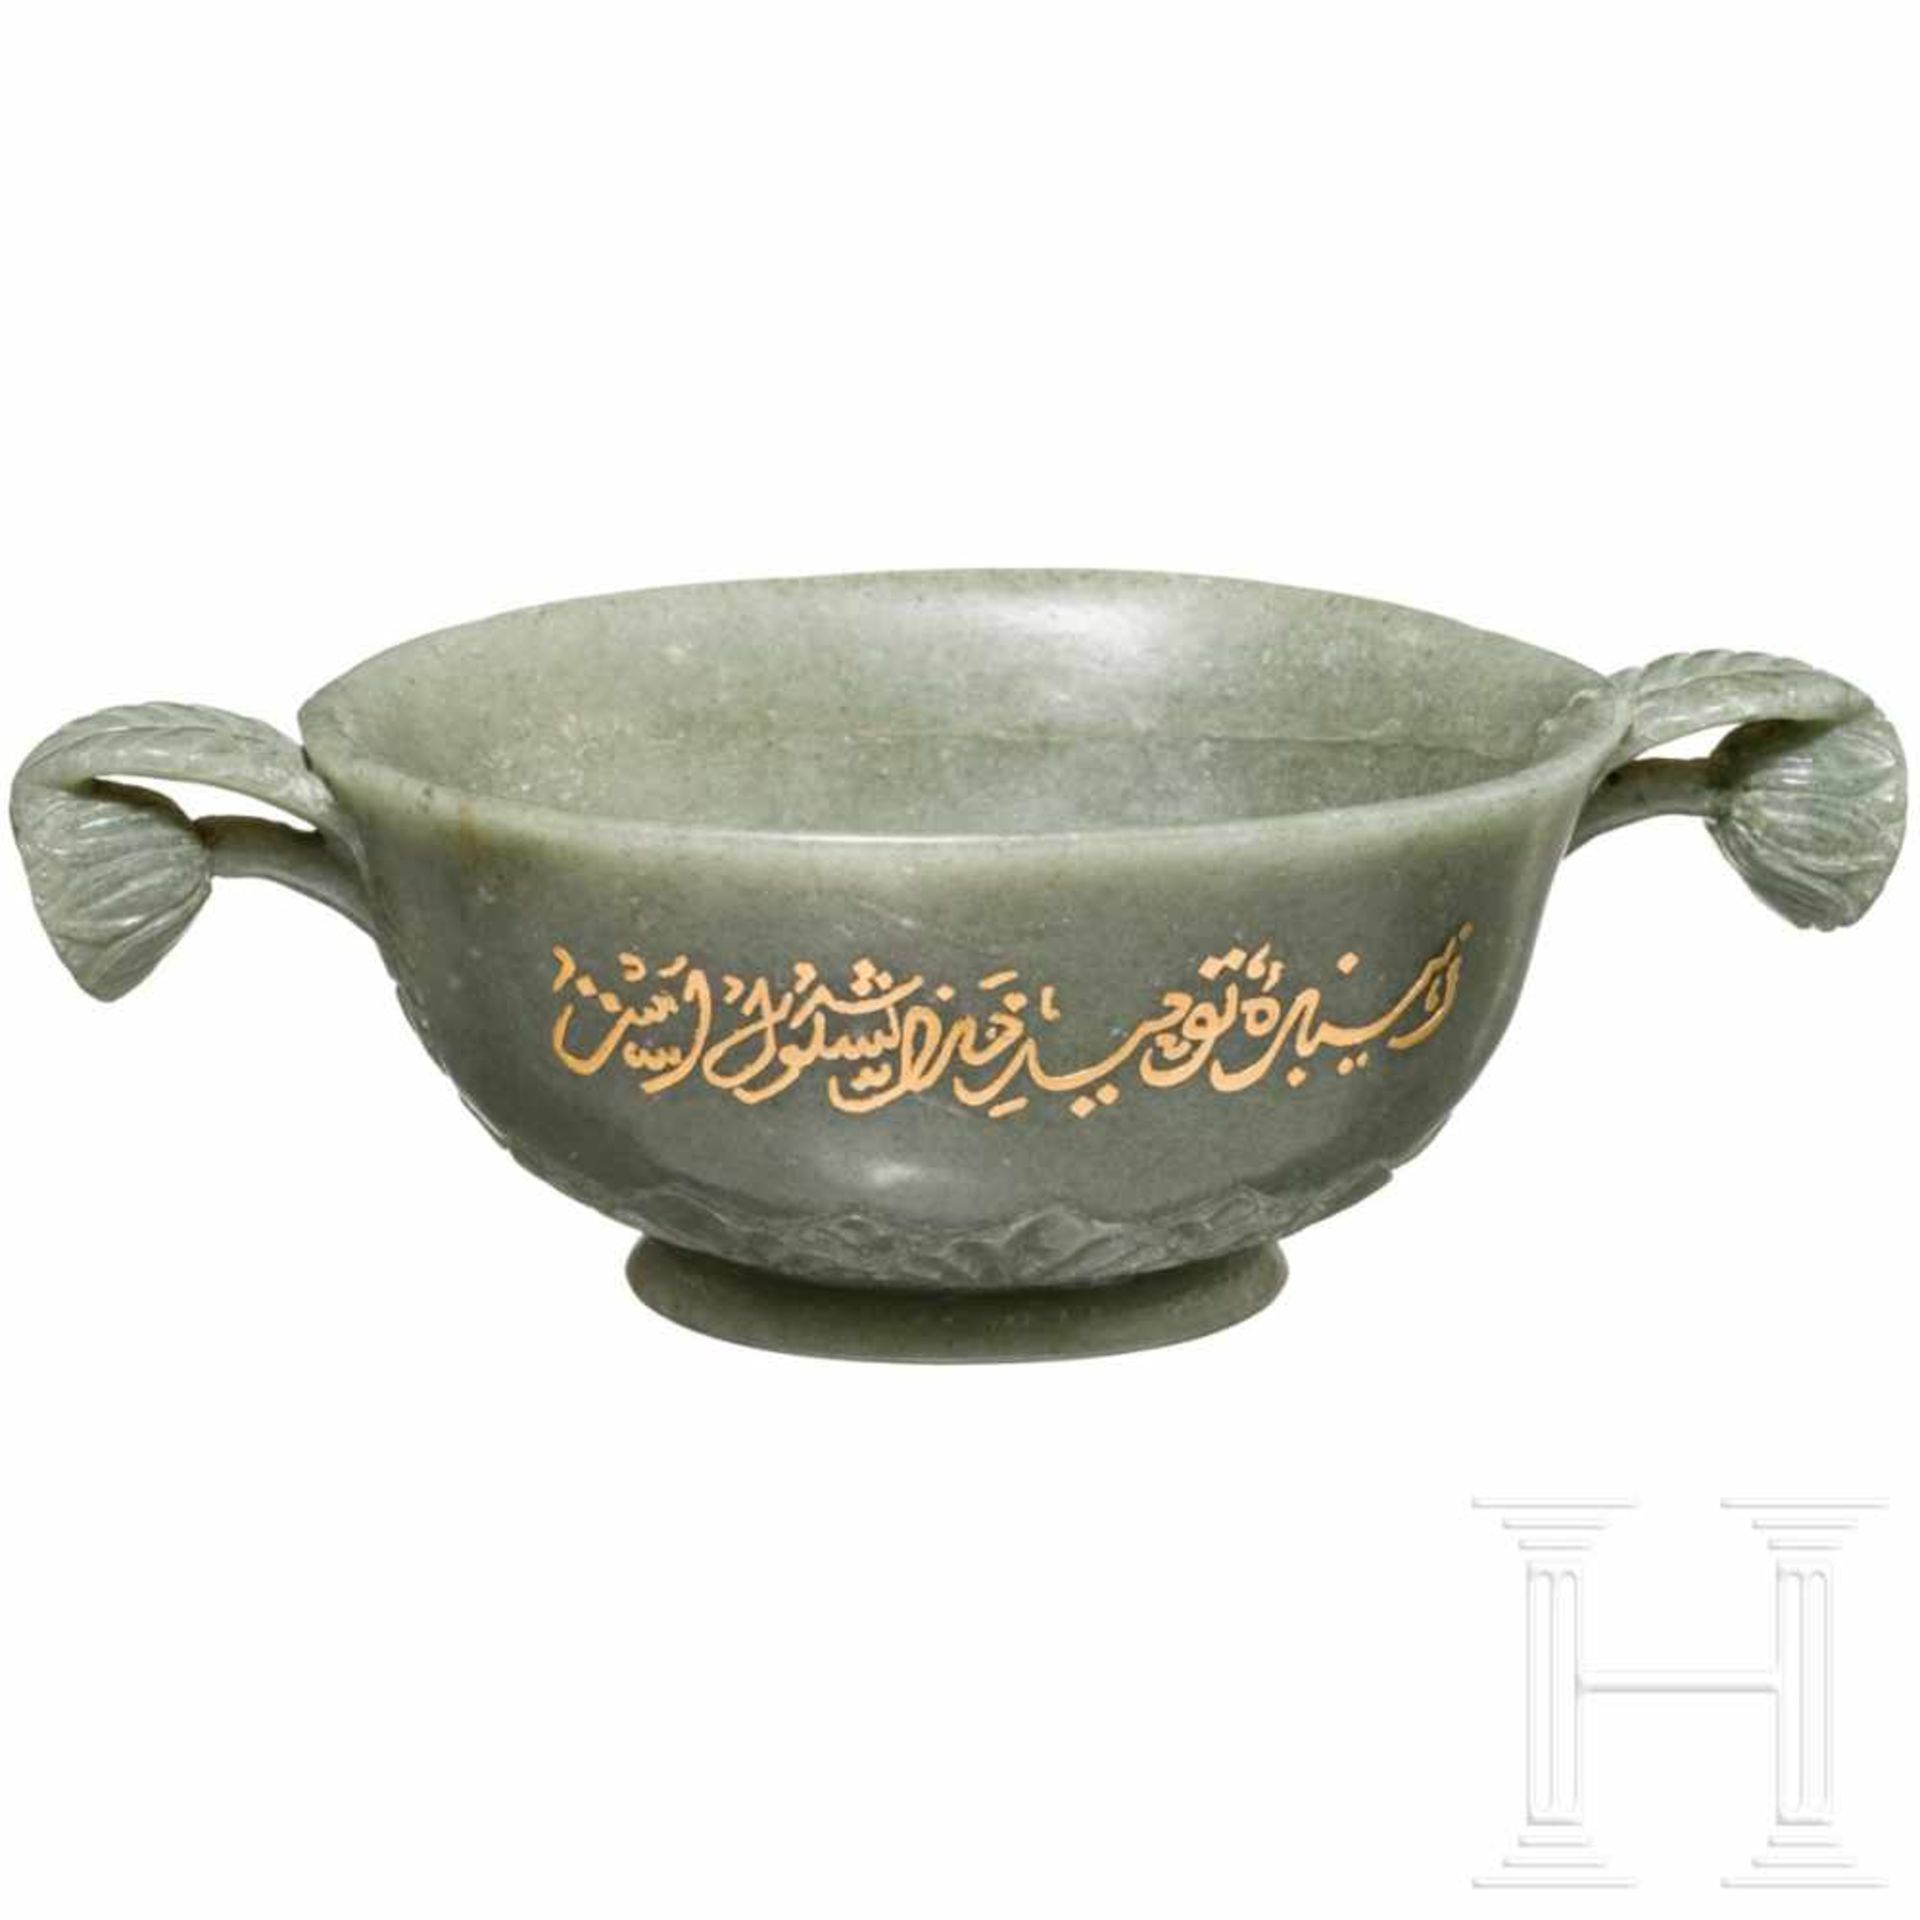 An Indian gold and diamond-studded jade receptacle, 20th centuryOval bowl in greyish-green jade with